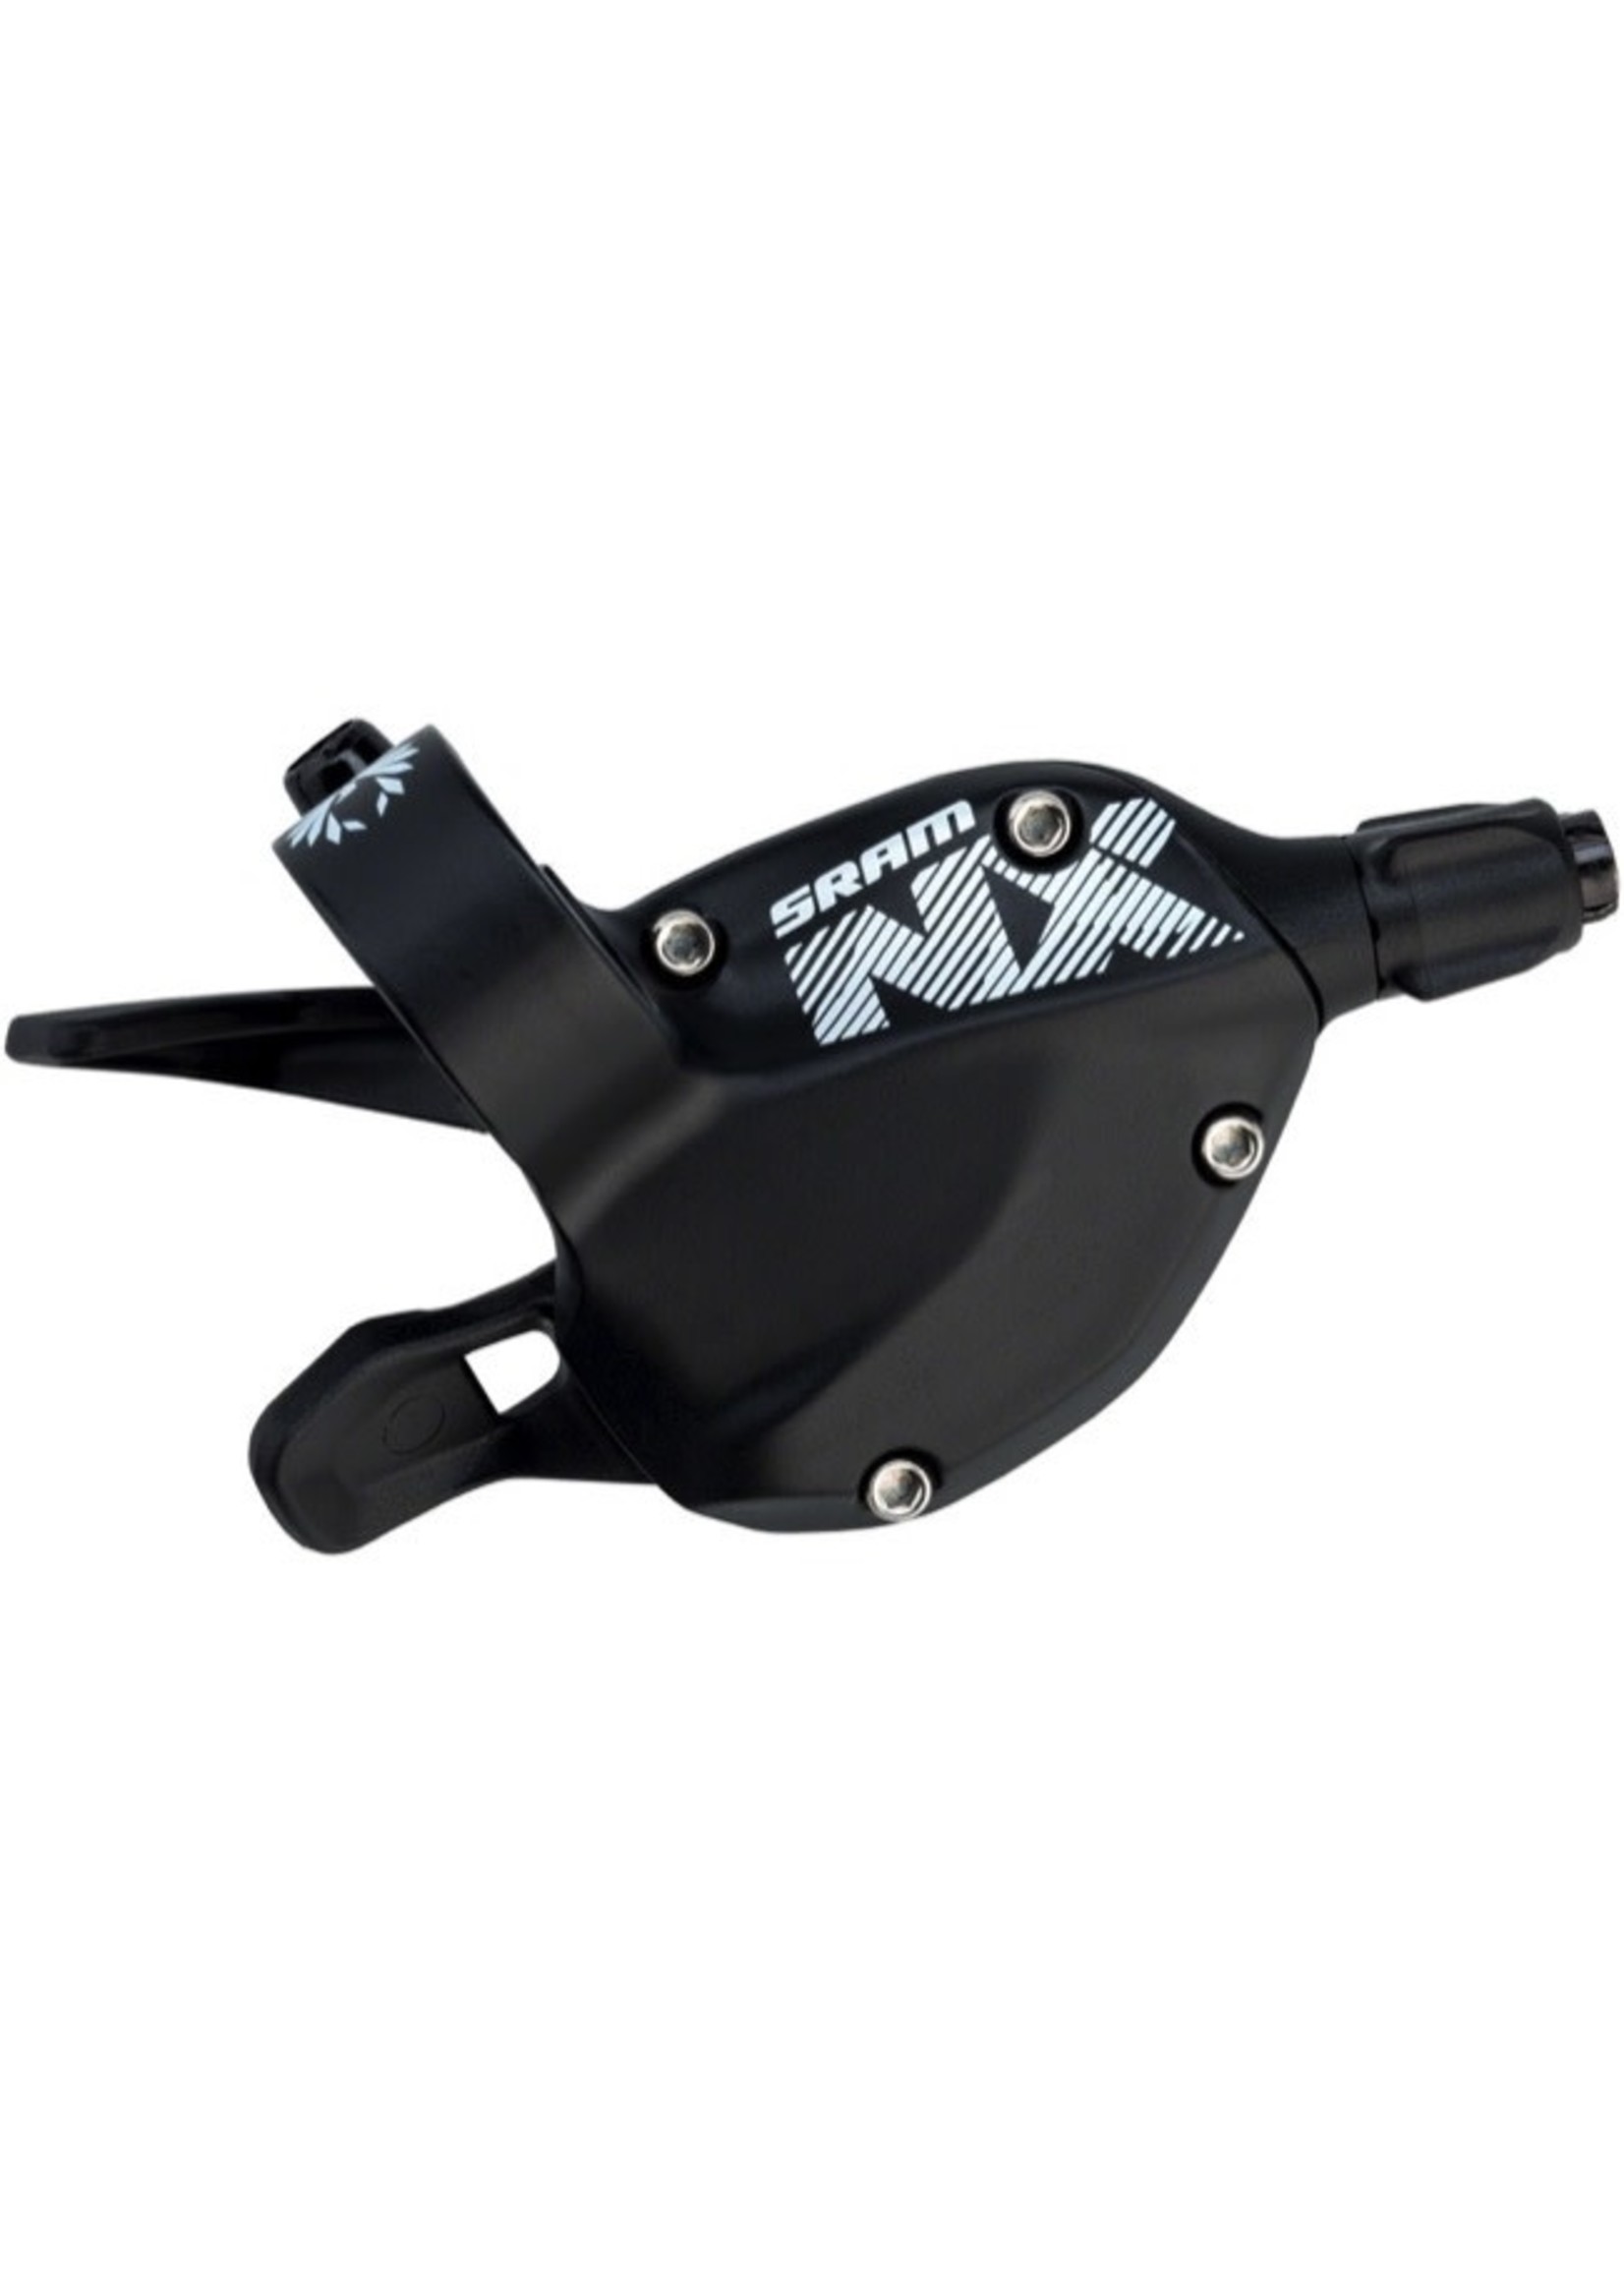 SRAM NX Eagle Rear Trigger Shifter - 12-Speed, with Discrete Clamp